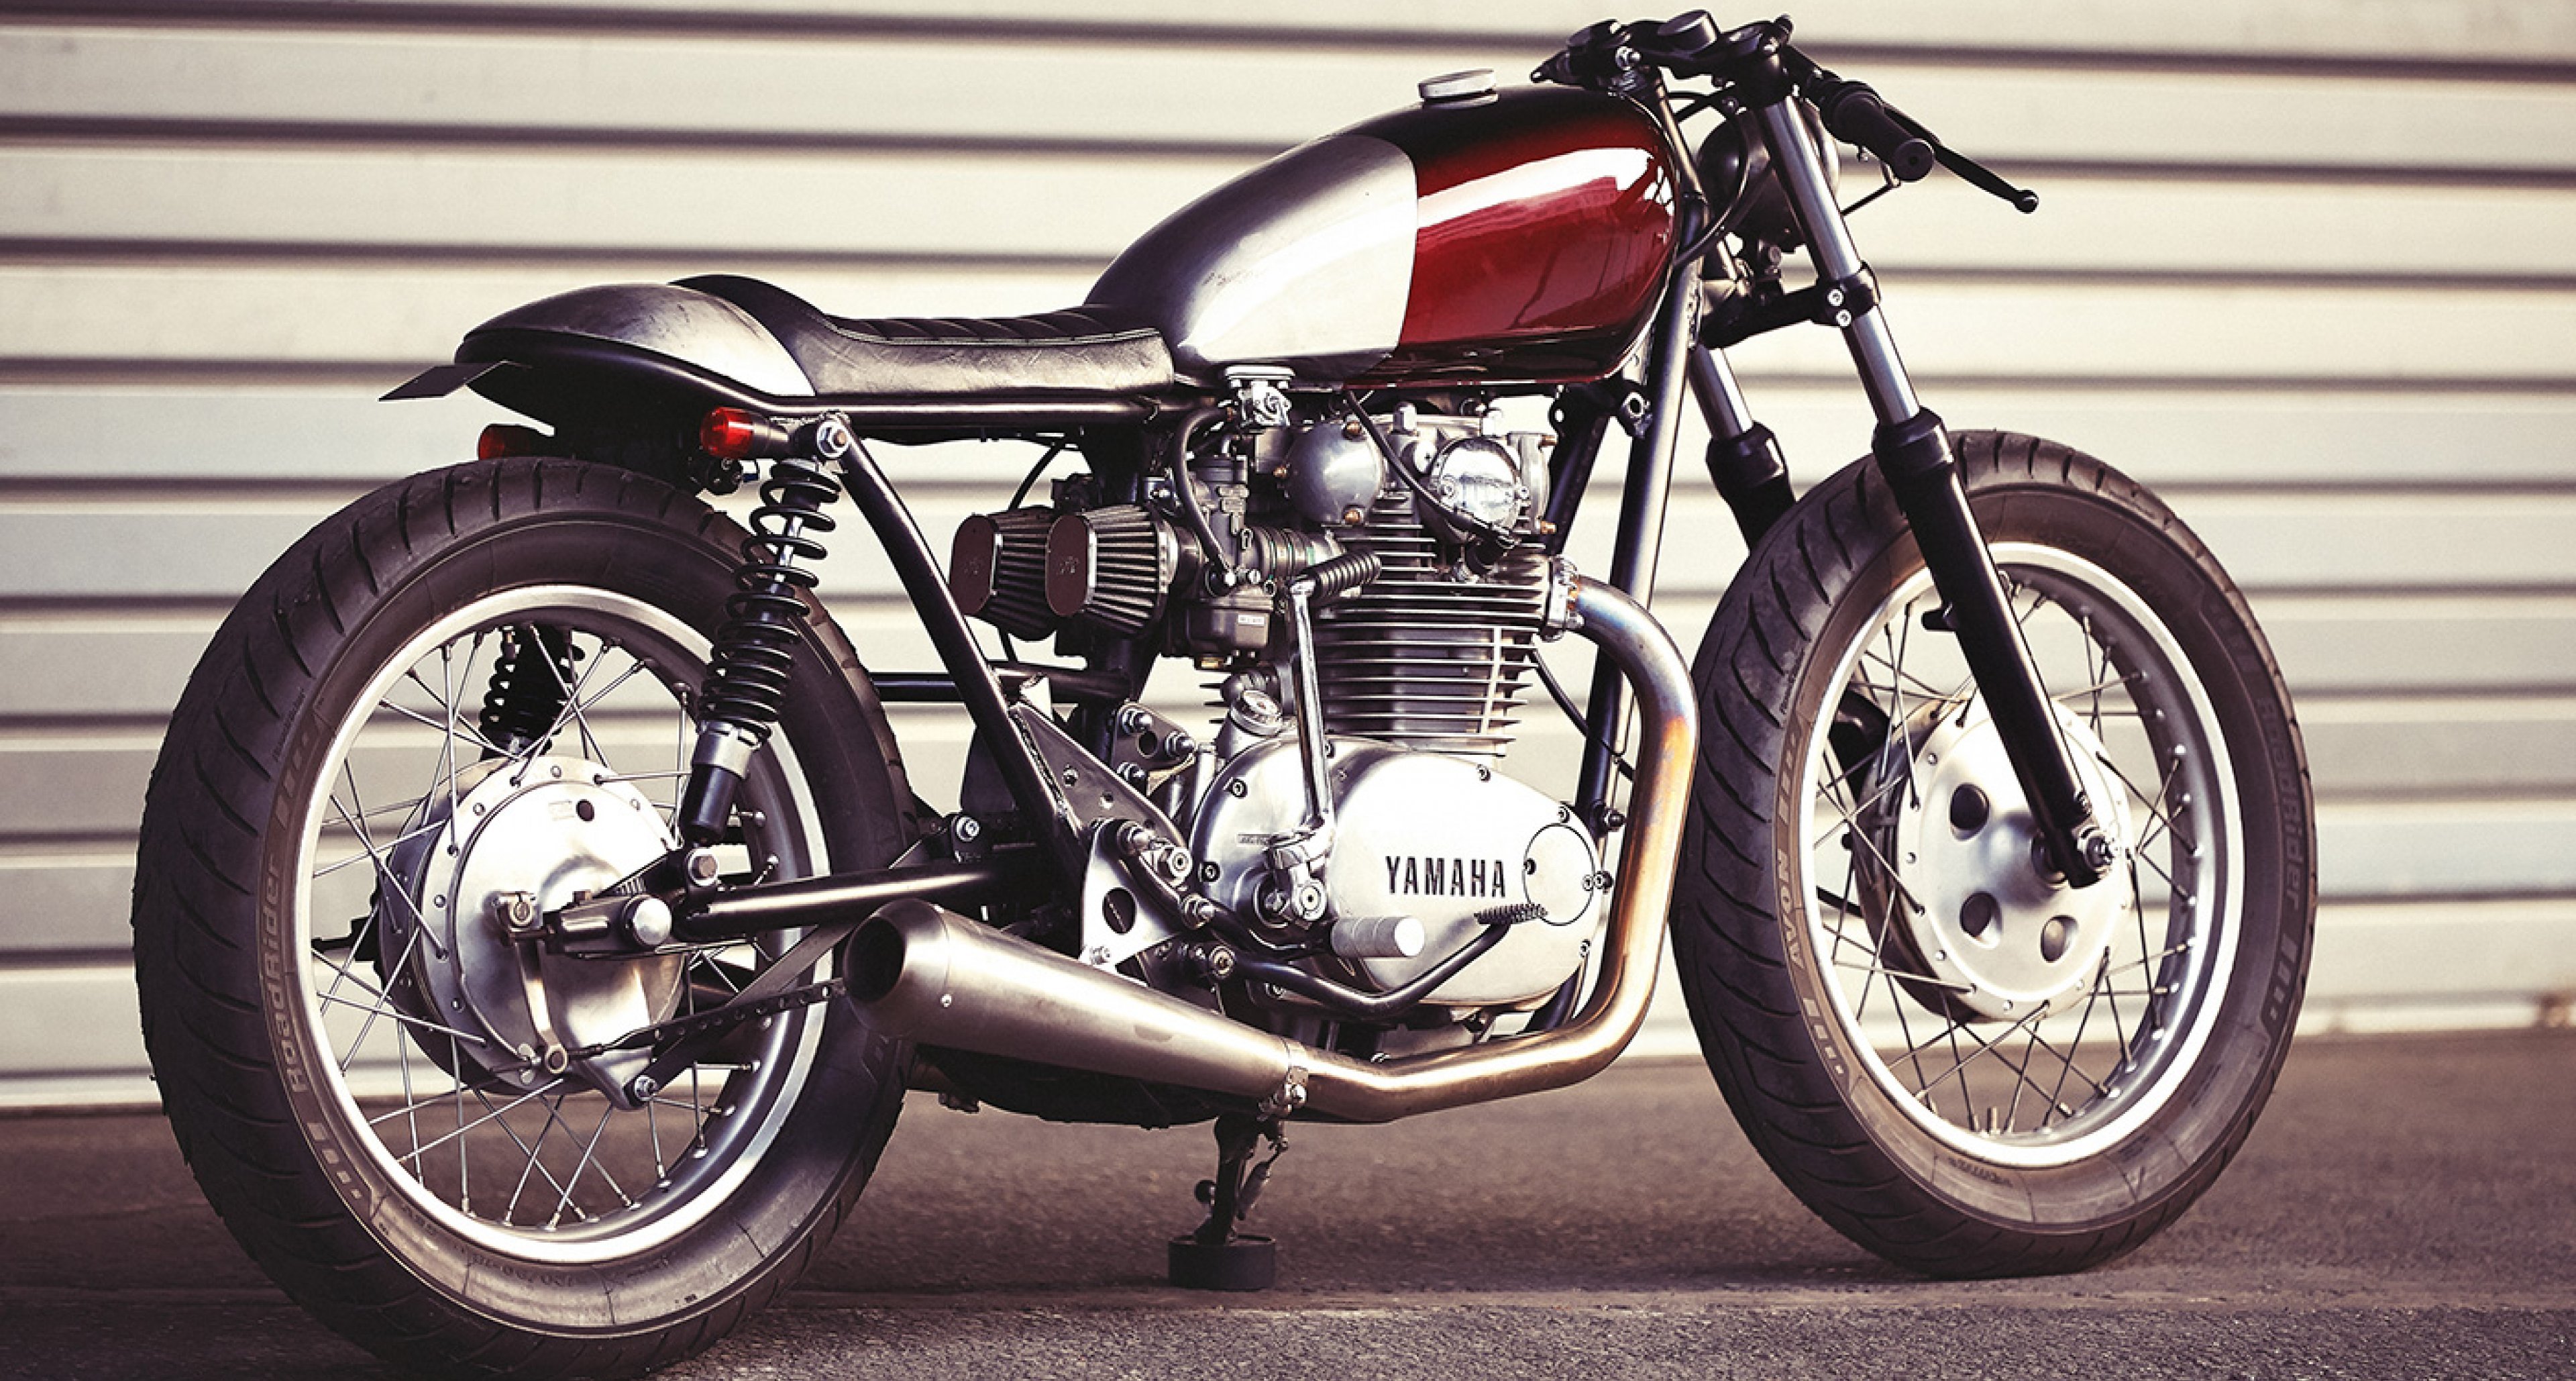 Clutch S Xs650 Is A Japanese Cafe Racer A La Francaise Classic